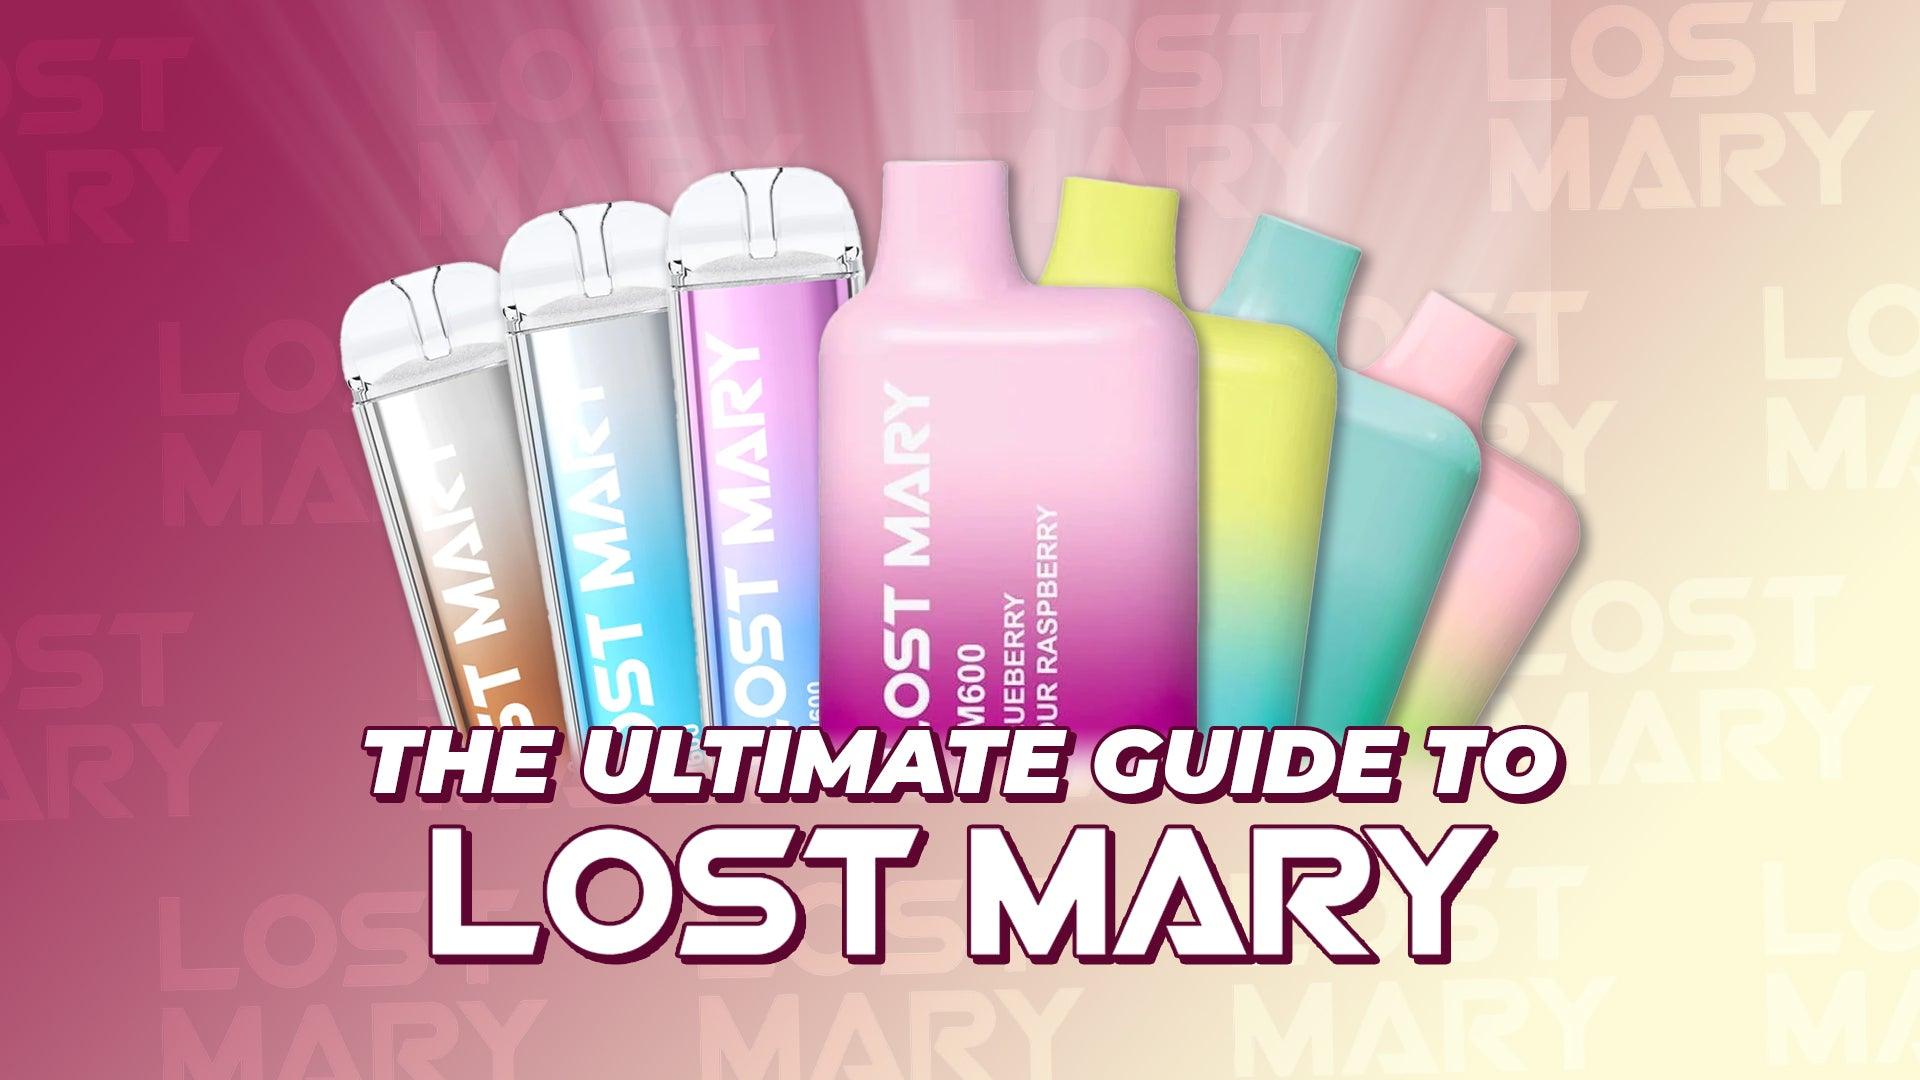 Ultimate Guide to Lost Mary Vape